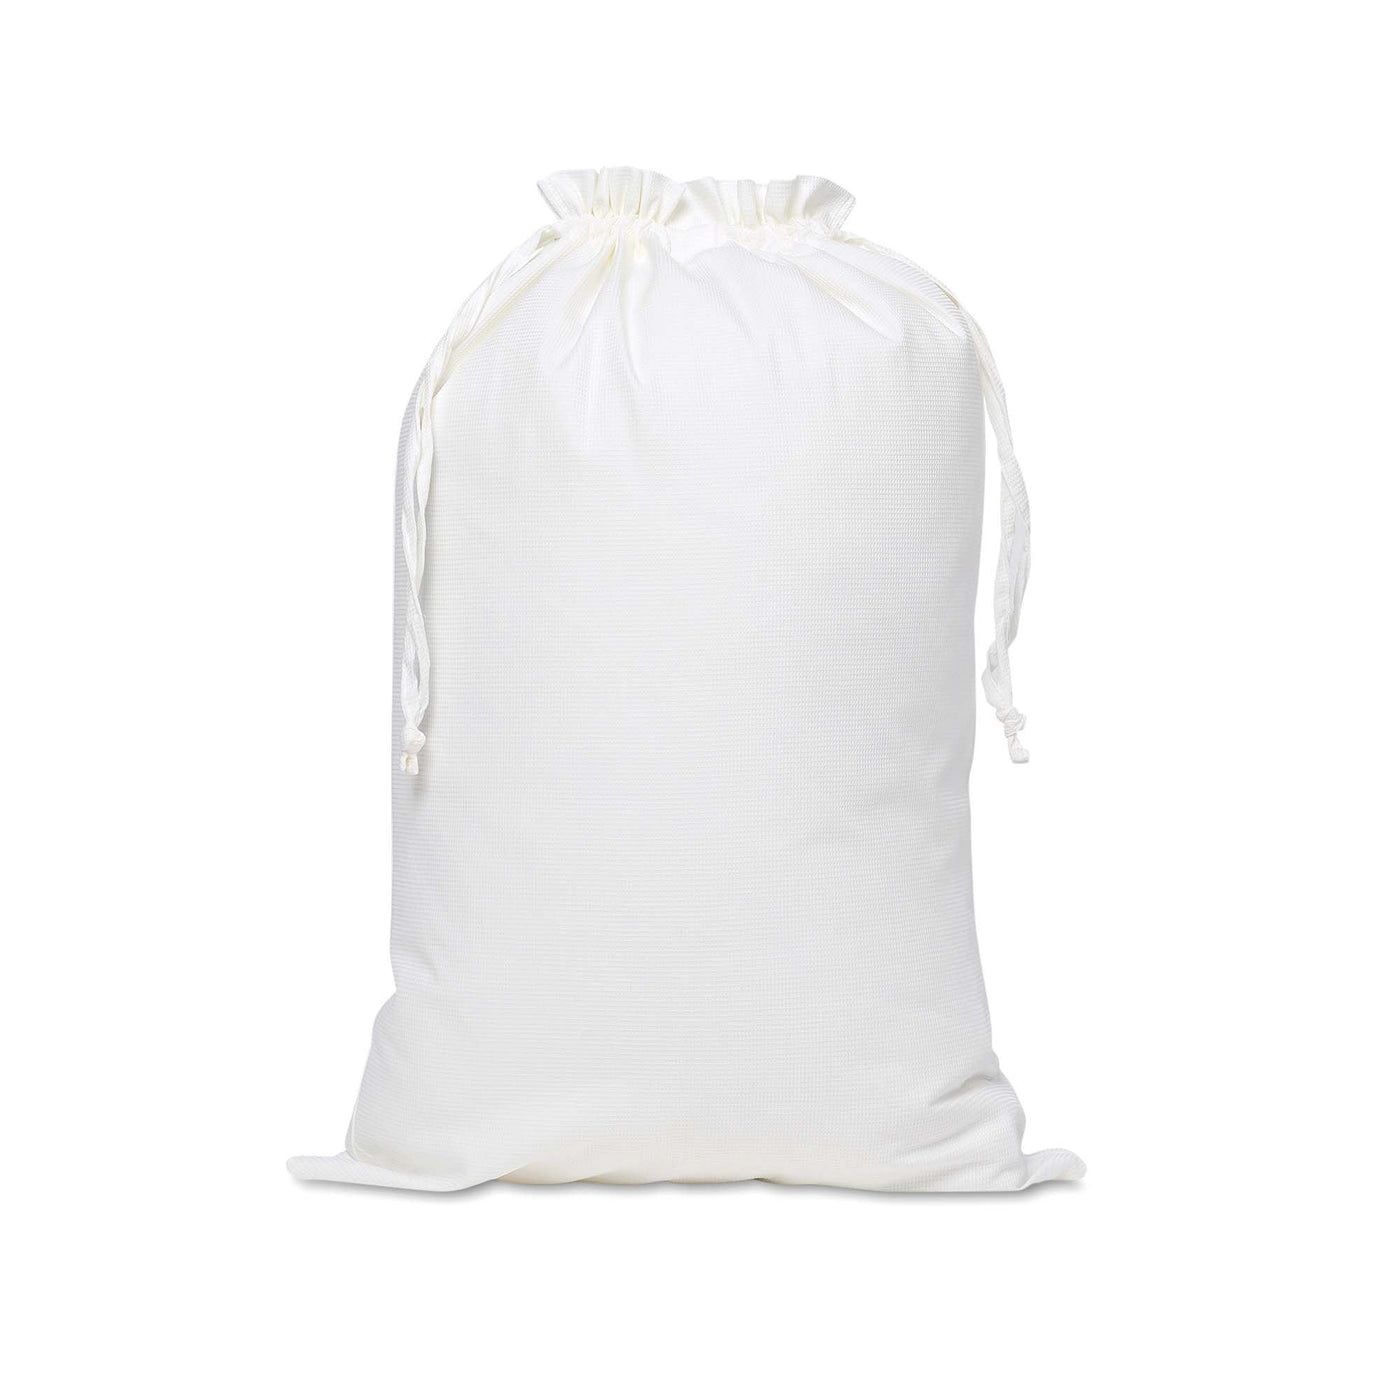 Milan White Waffle Bags with Laundry, Hairdryer, Bath Mat, News and Shoe Bag Collection